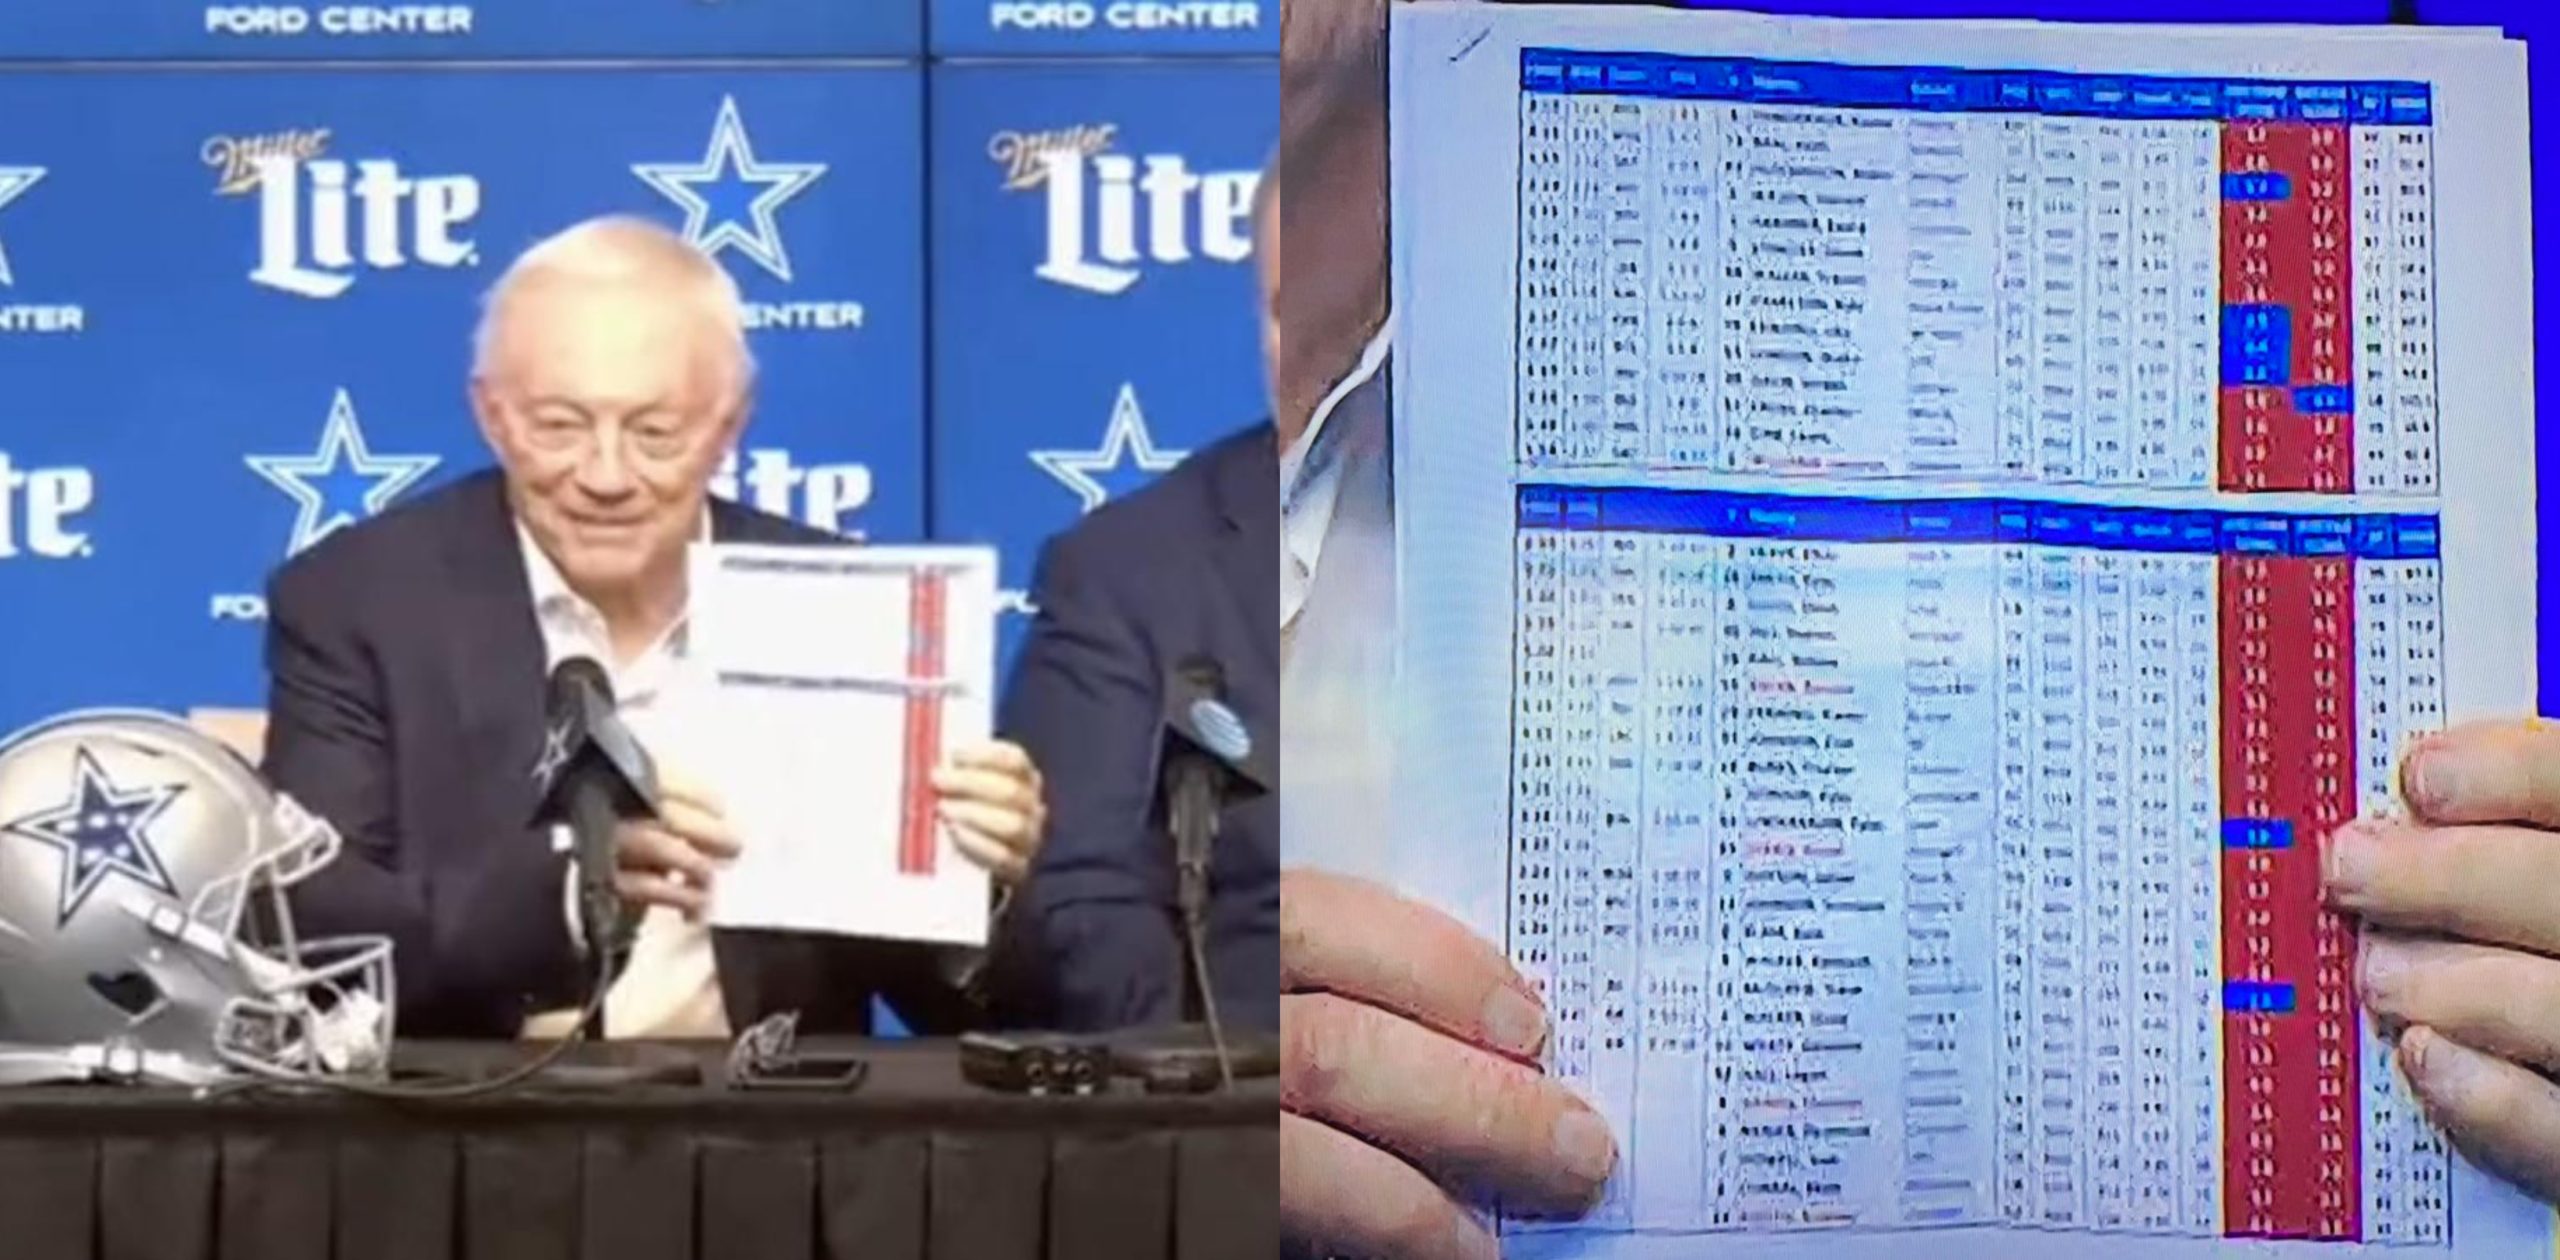 The Internet Deciphered The Dallas Cowboys Draft Sheet That Jerry Jones Showed The Media During Press Conference - Daily Snark